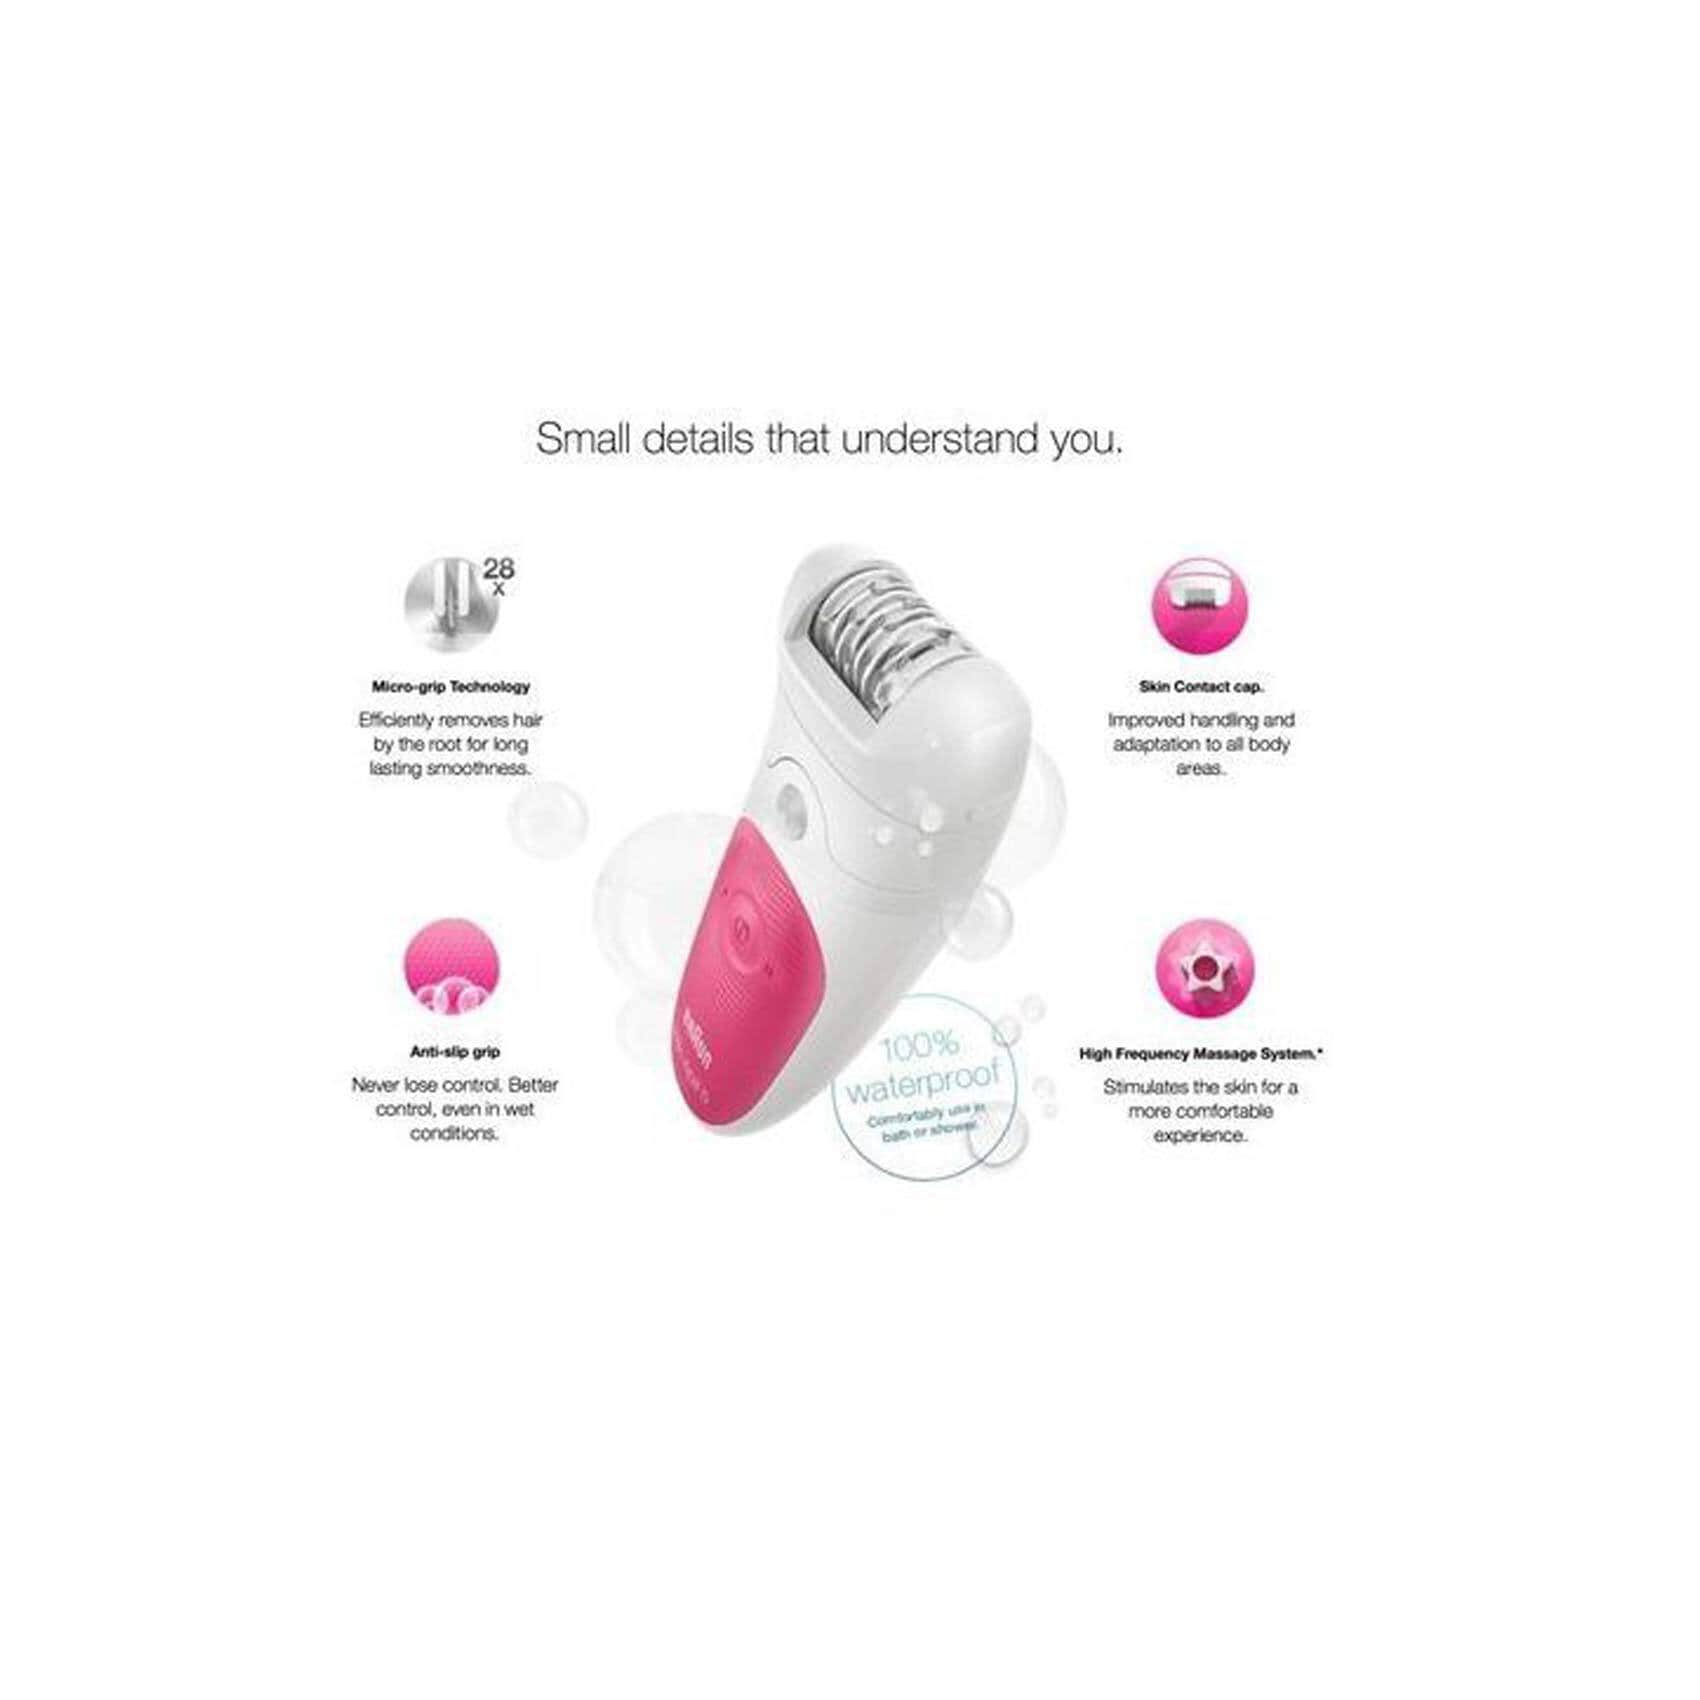 Buy Braun Cordless Epil Carrefour - and Care on Dry Personal Epilator Wet 5-513 Beauty Egypt Silk - Online Pink 5 & Shop